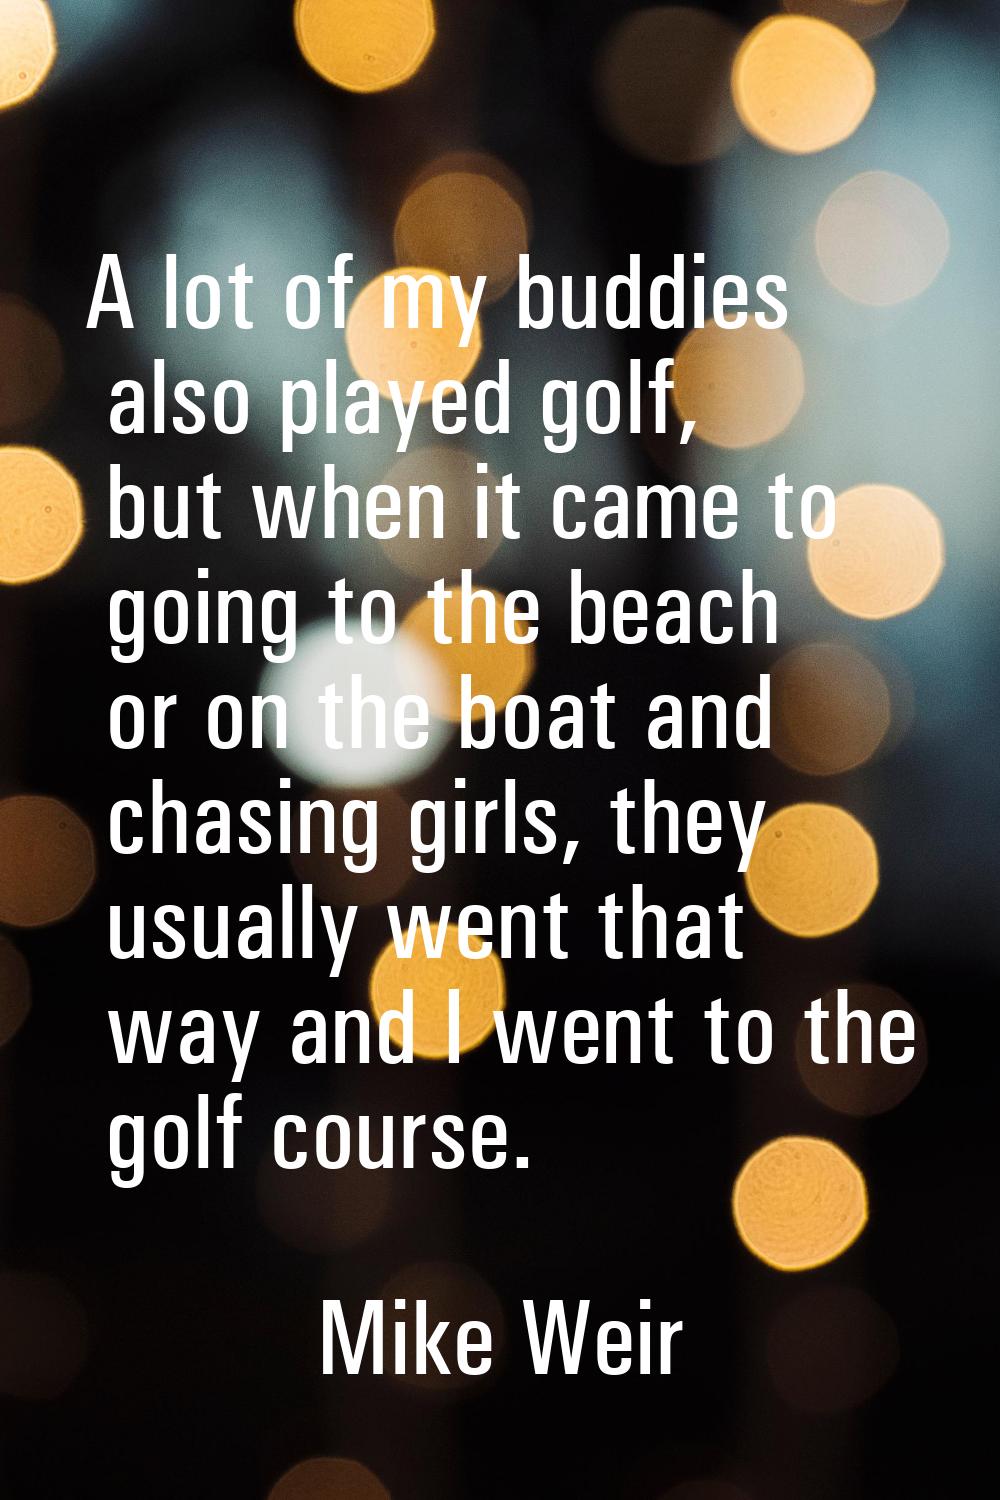 A lot of my buddies also played golf, but when it came to going to the beach or on the boat and cha